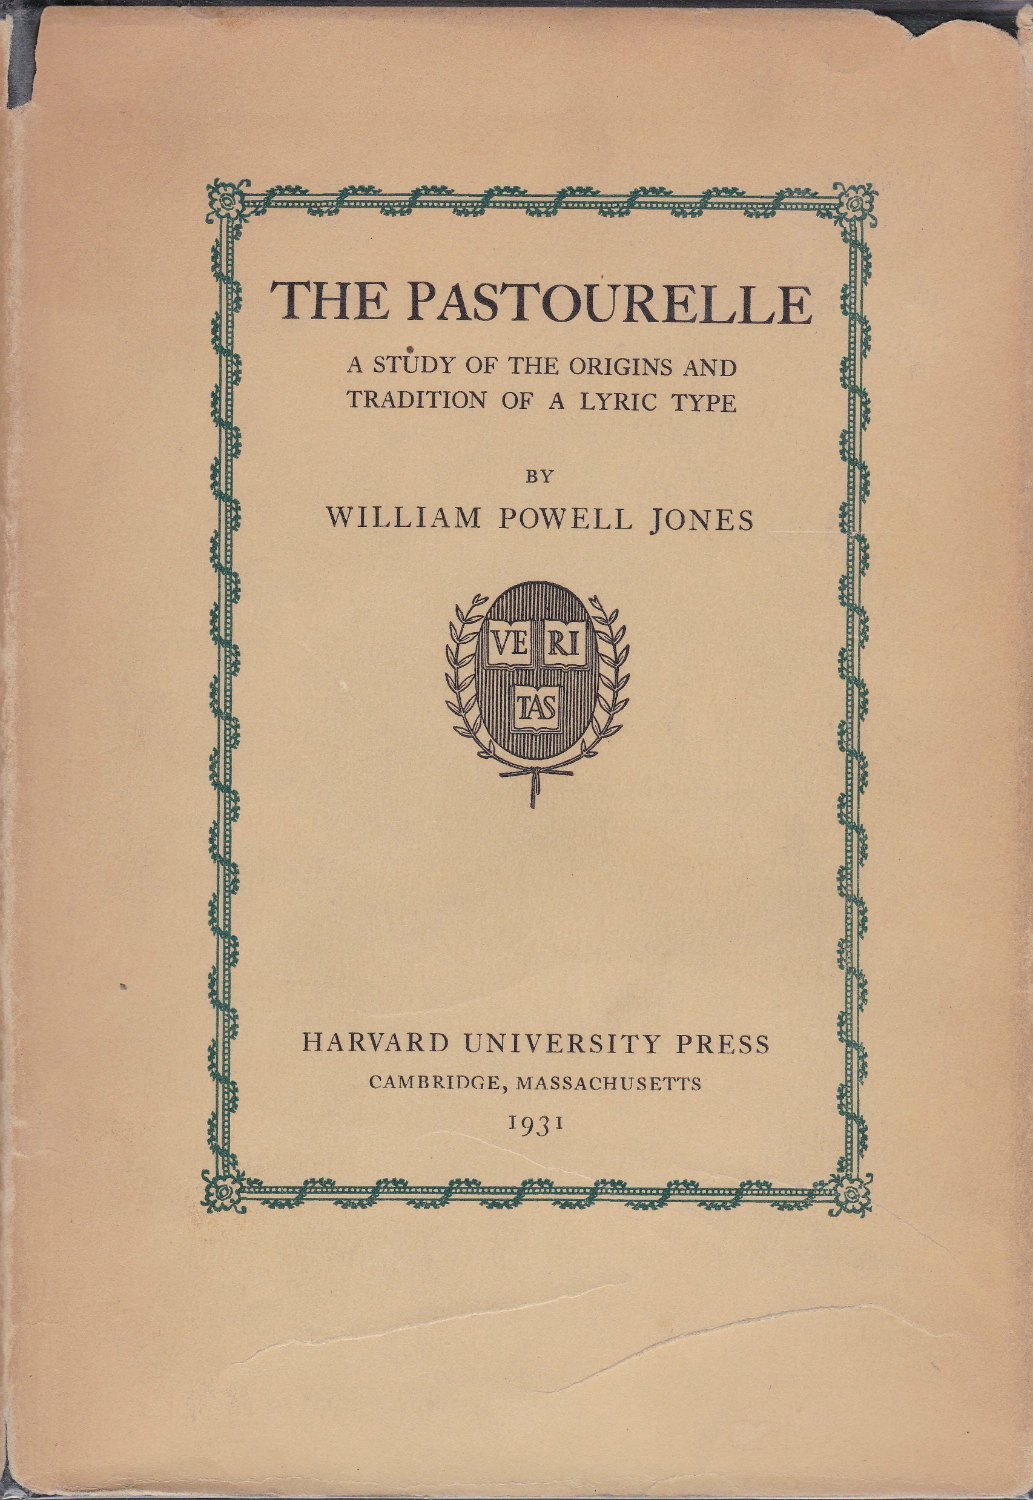 The Pastourelle. A Study of Origins and Tradition of a Lyric Type.